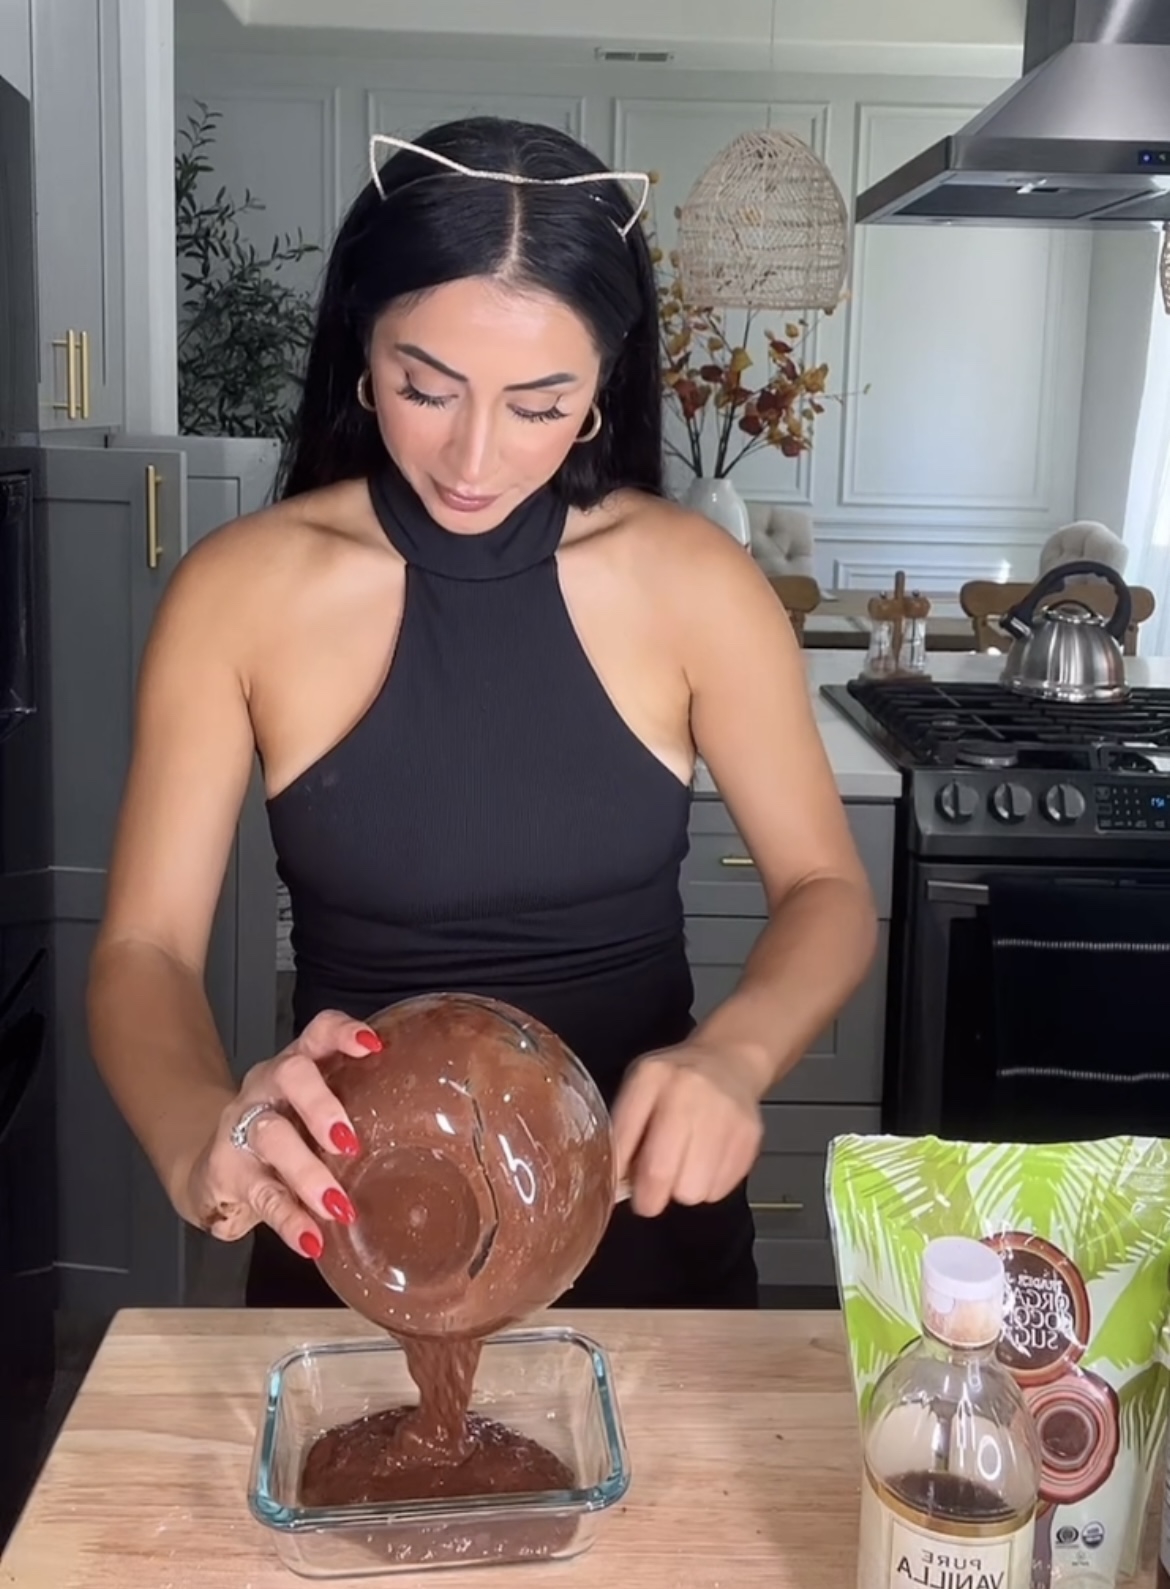 woman wearing cat ears pouring brownie batter in a bowl